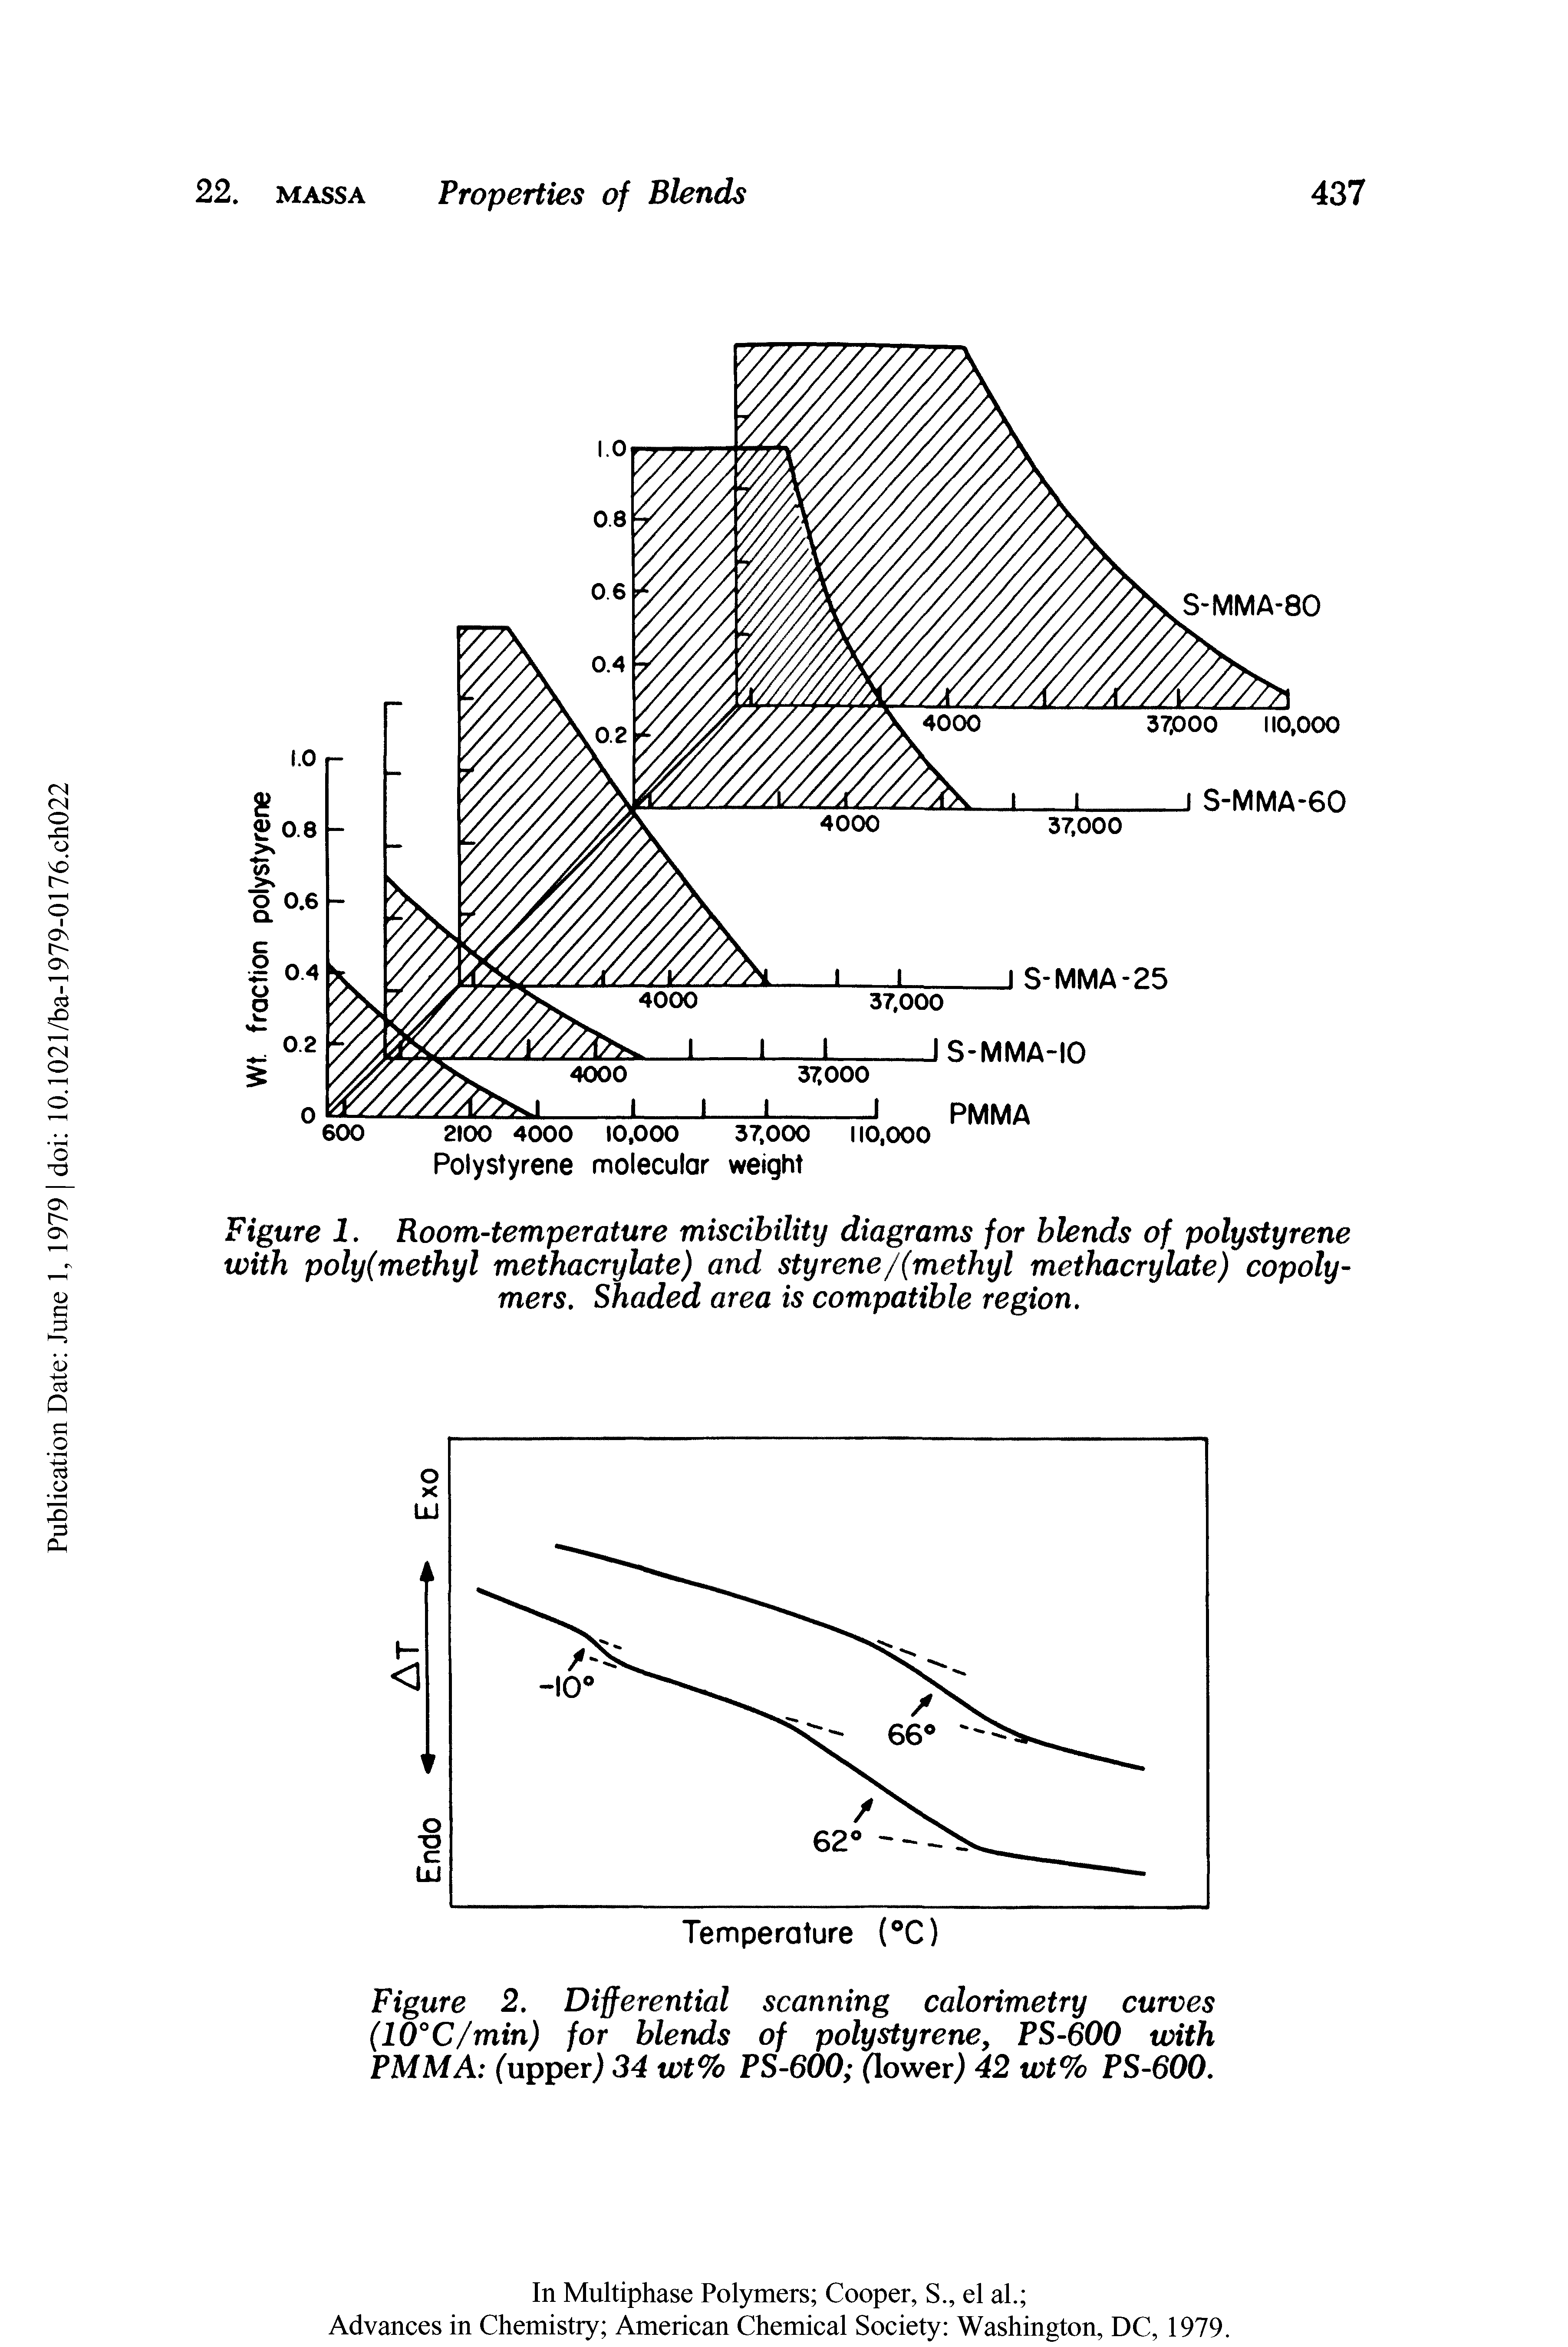 Figure 1. Room-temperature miscibility diagrams for blends of polystyrene with poly(methyl methacrylate) and styrene/(methyl methacrylate) copolymers. Shaded area is compatible region.